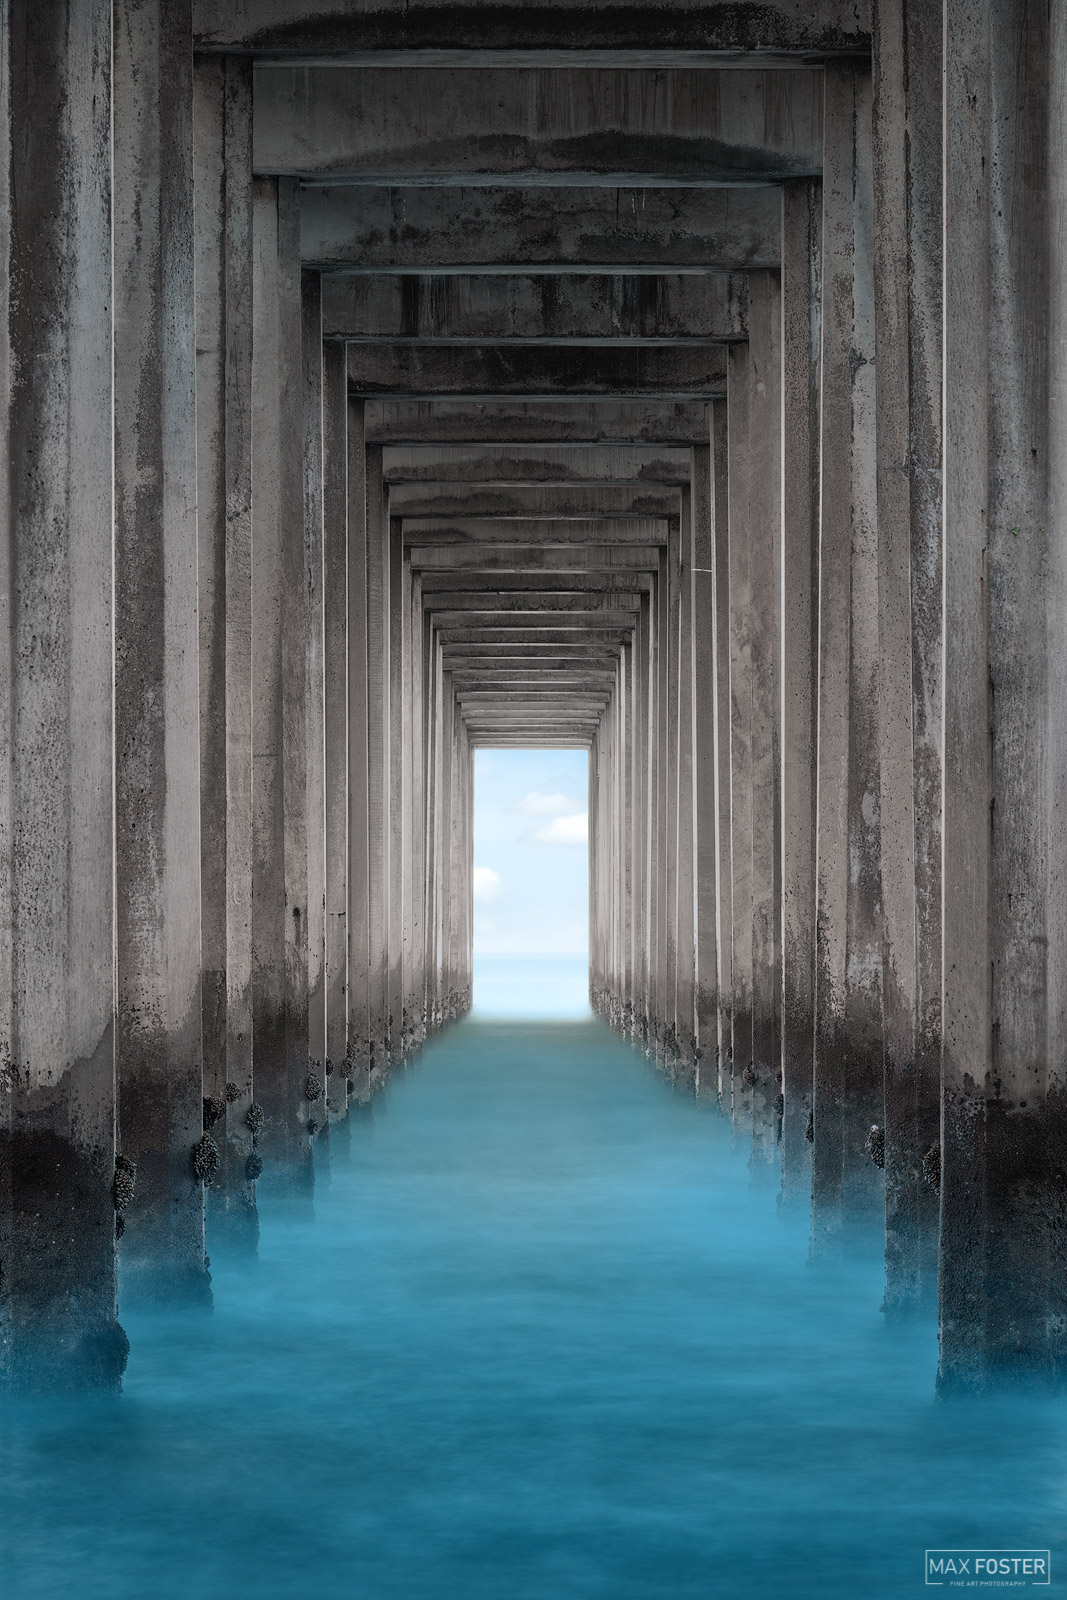 Breathe new life into your home with Lost In A Dream, Max Foster's limited edition photography print of Scripps Pier, La Jolla...